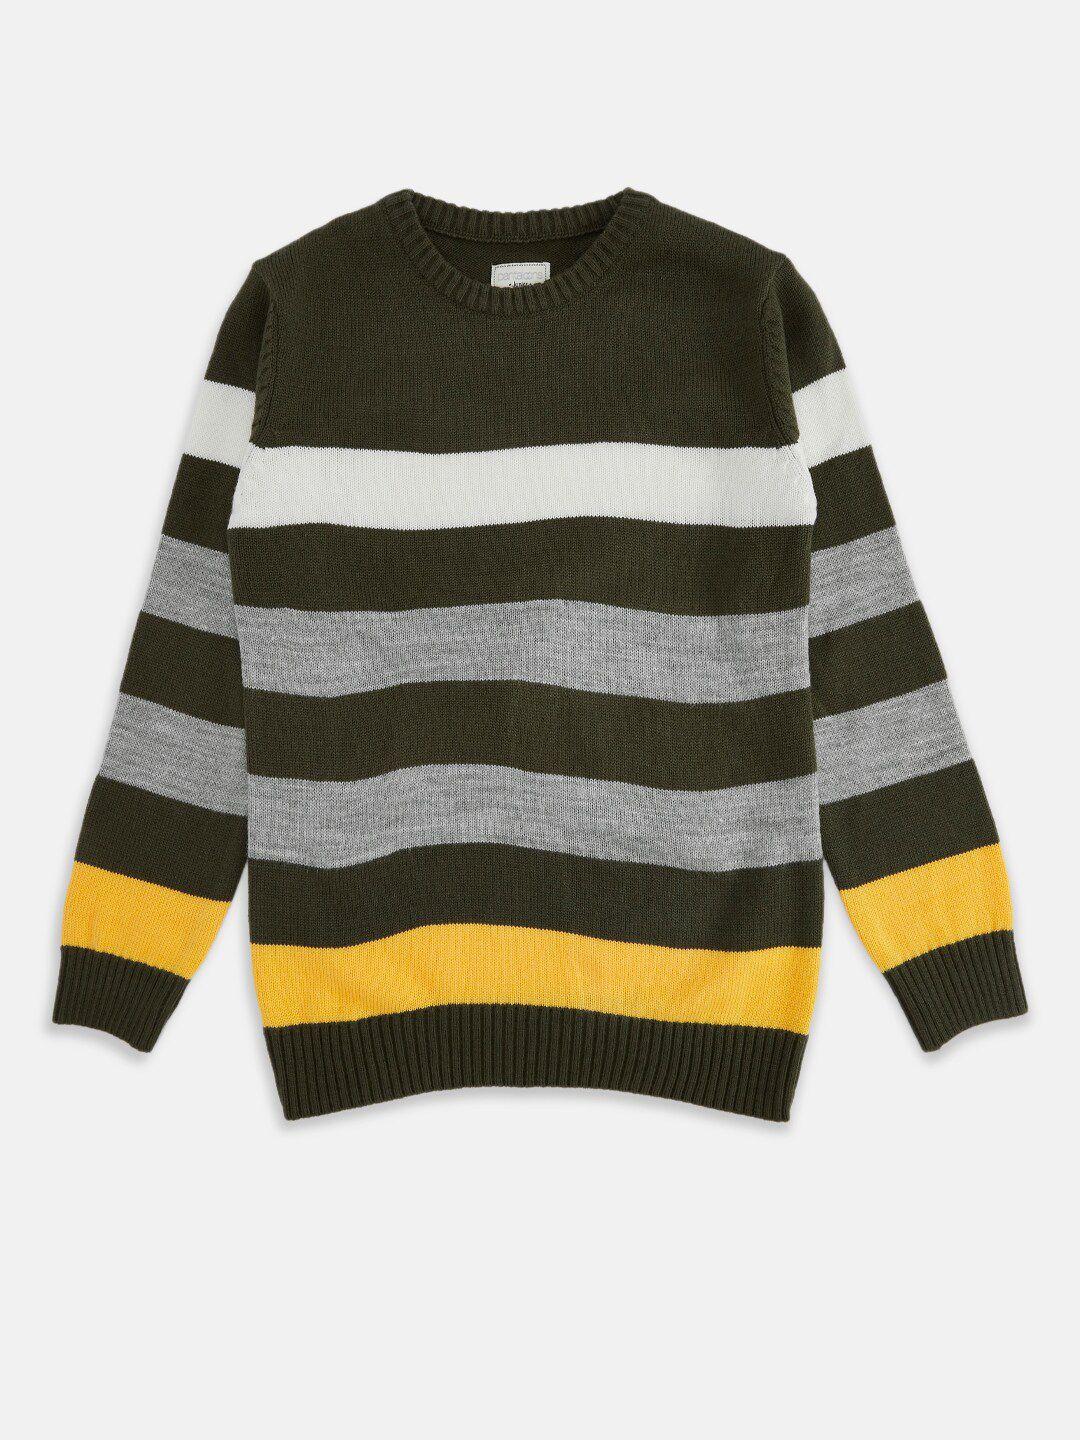 pantaloons junior boys olive green & yellow striped pullover